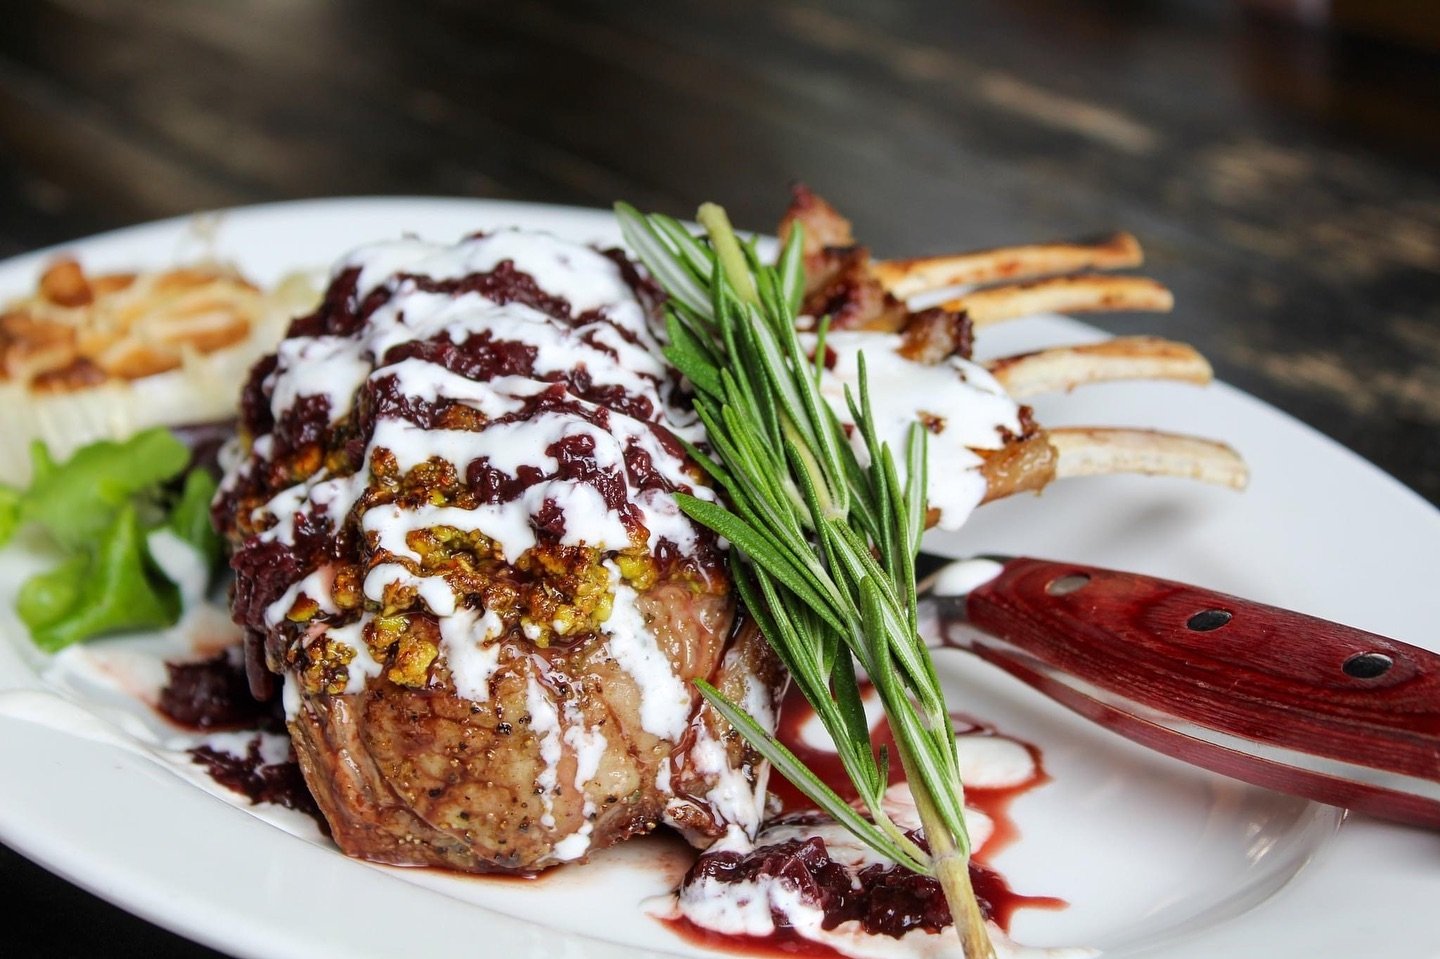 Our Pistachio Encrusted Lamb is calling your name! 🔥 

Cabernet and balsamic glazed New Zealand rack of lamb with a Pistachio crust. Finished with a goat cheese sour cream and blackberry cabernet compote. Here for a limited time!